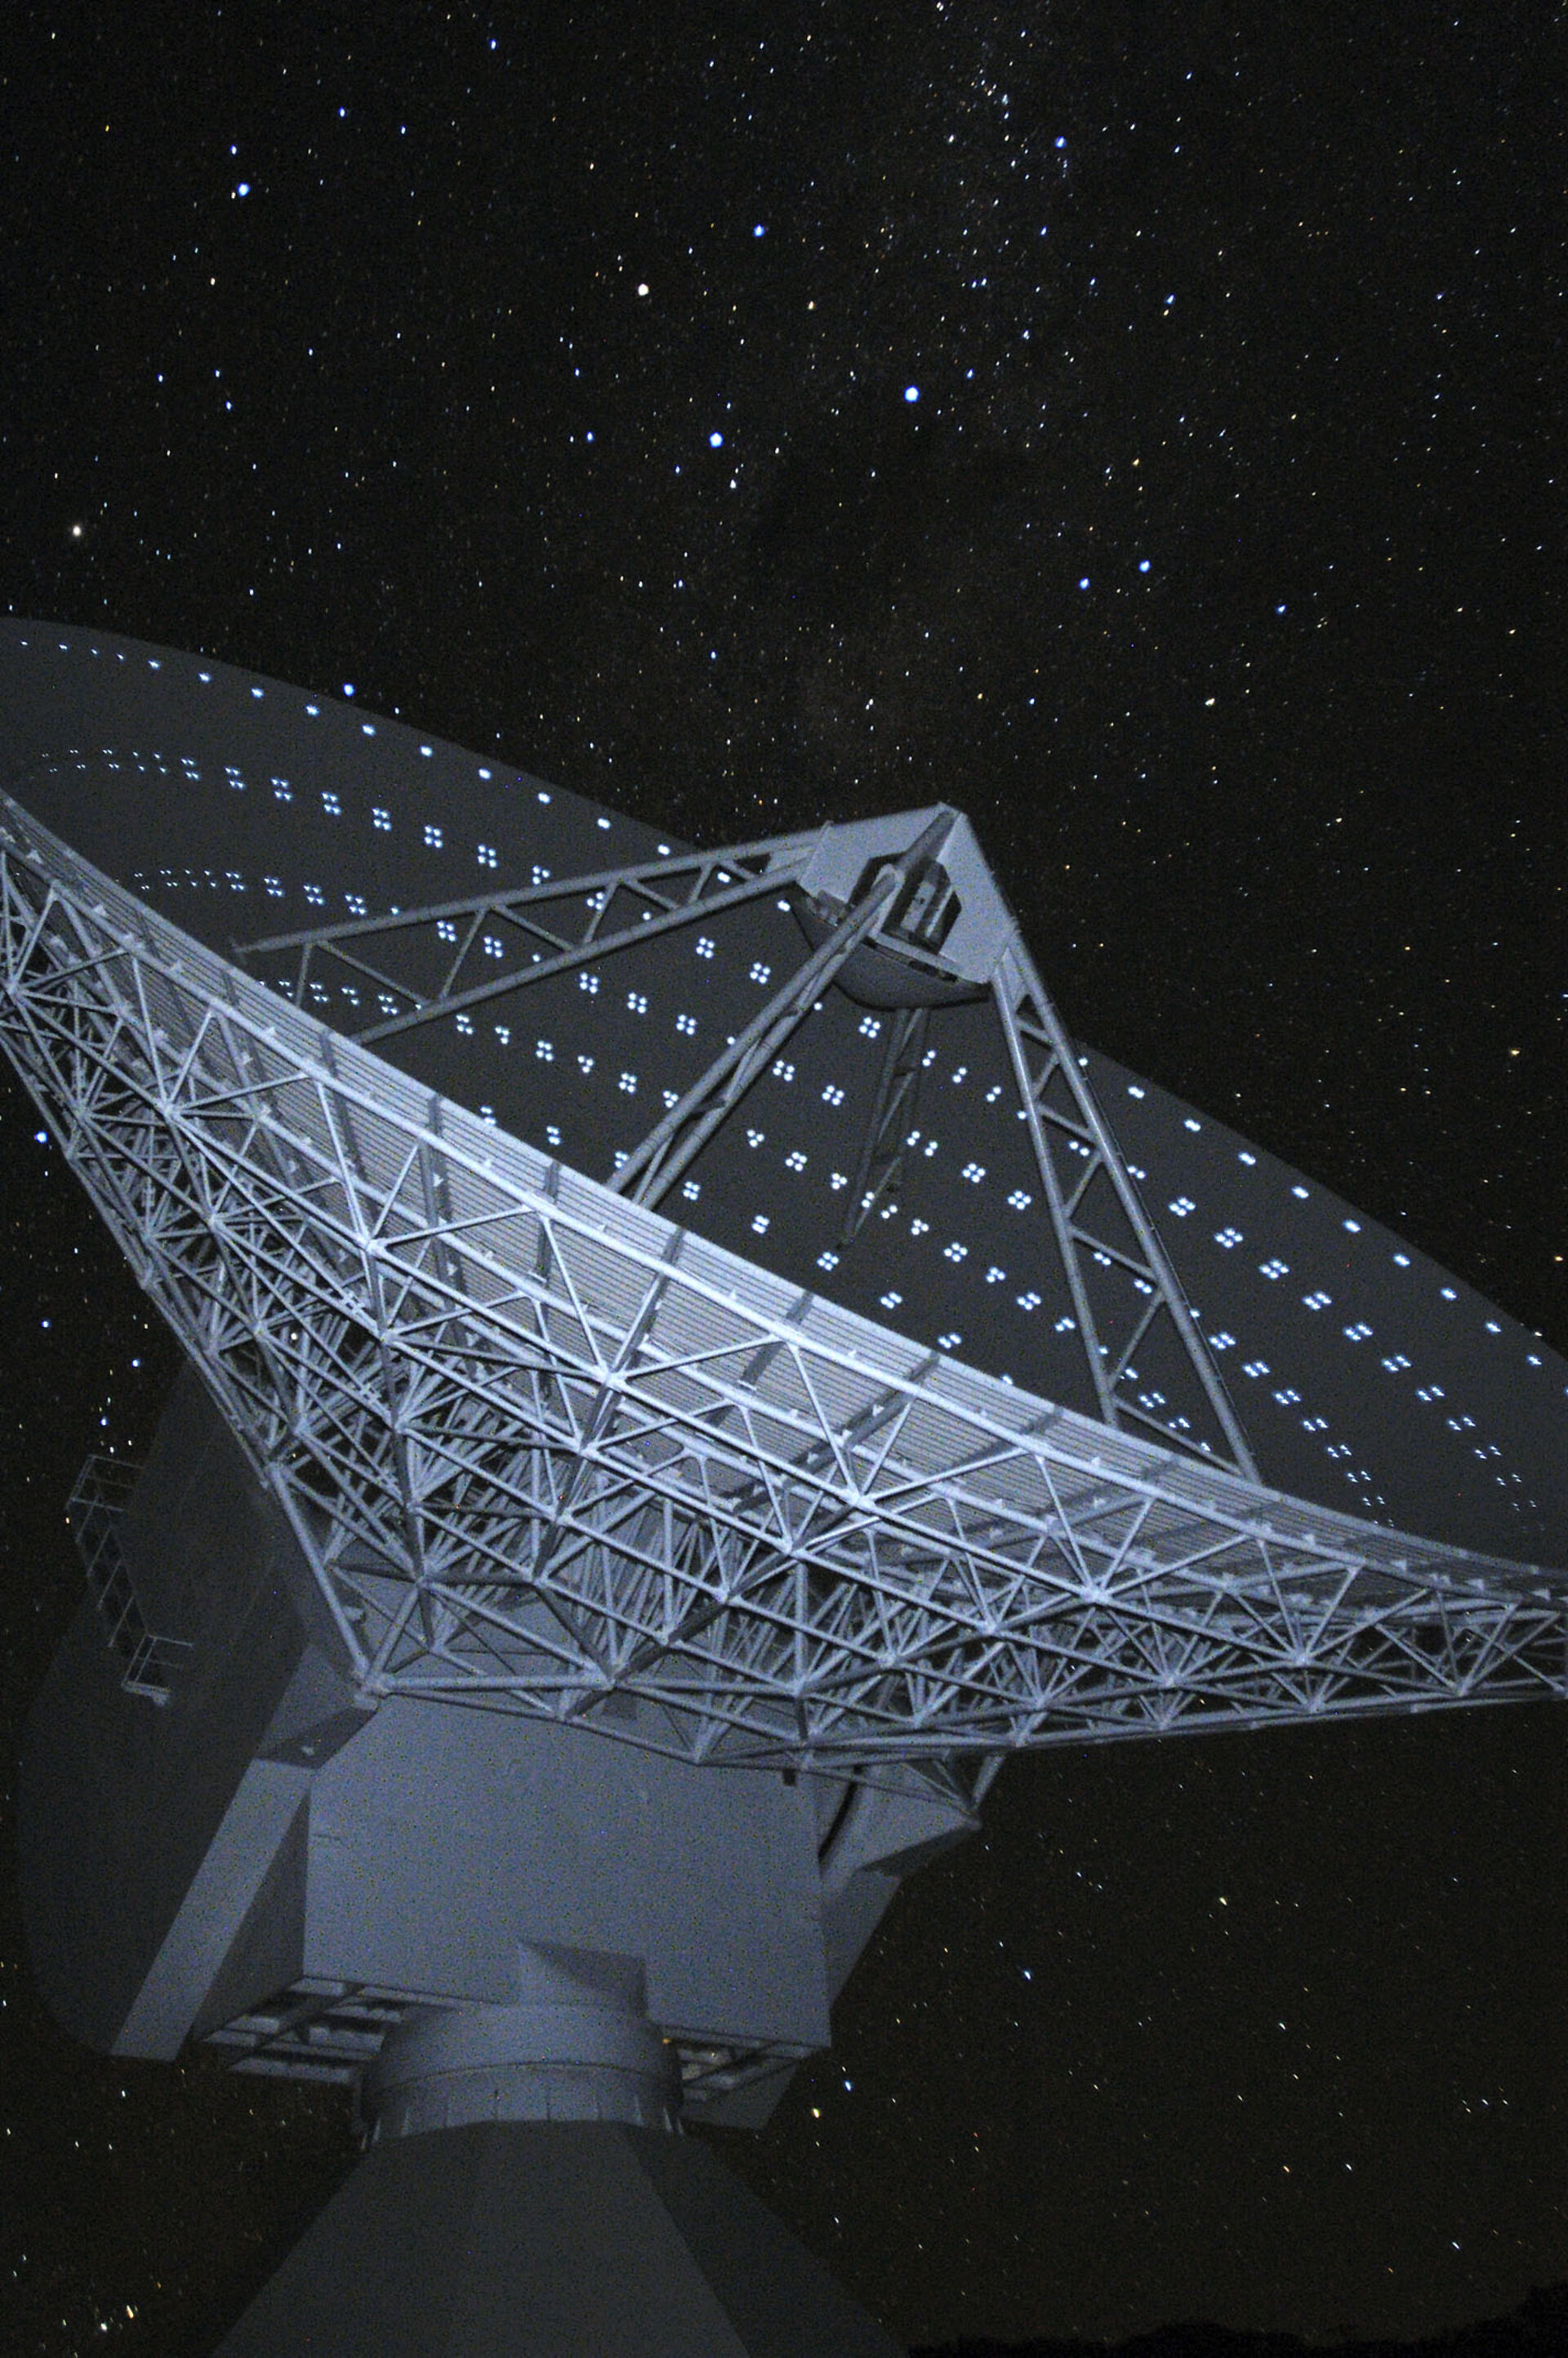 What is ESA’s first deep space antenna looking at?